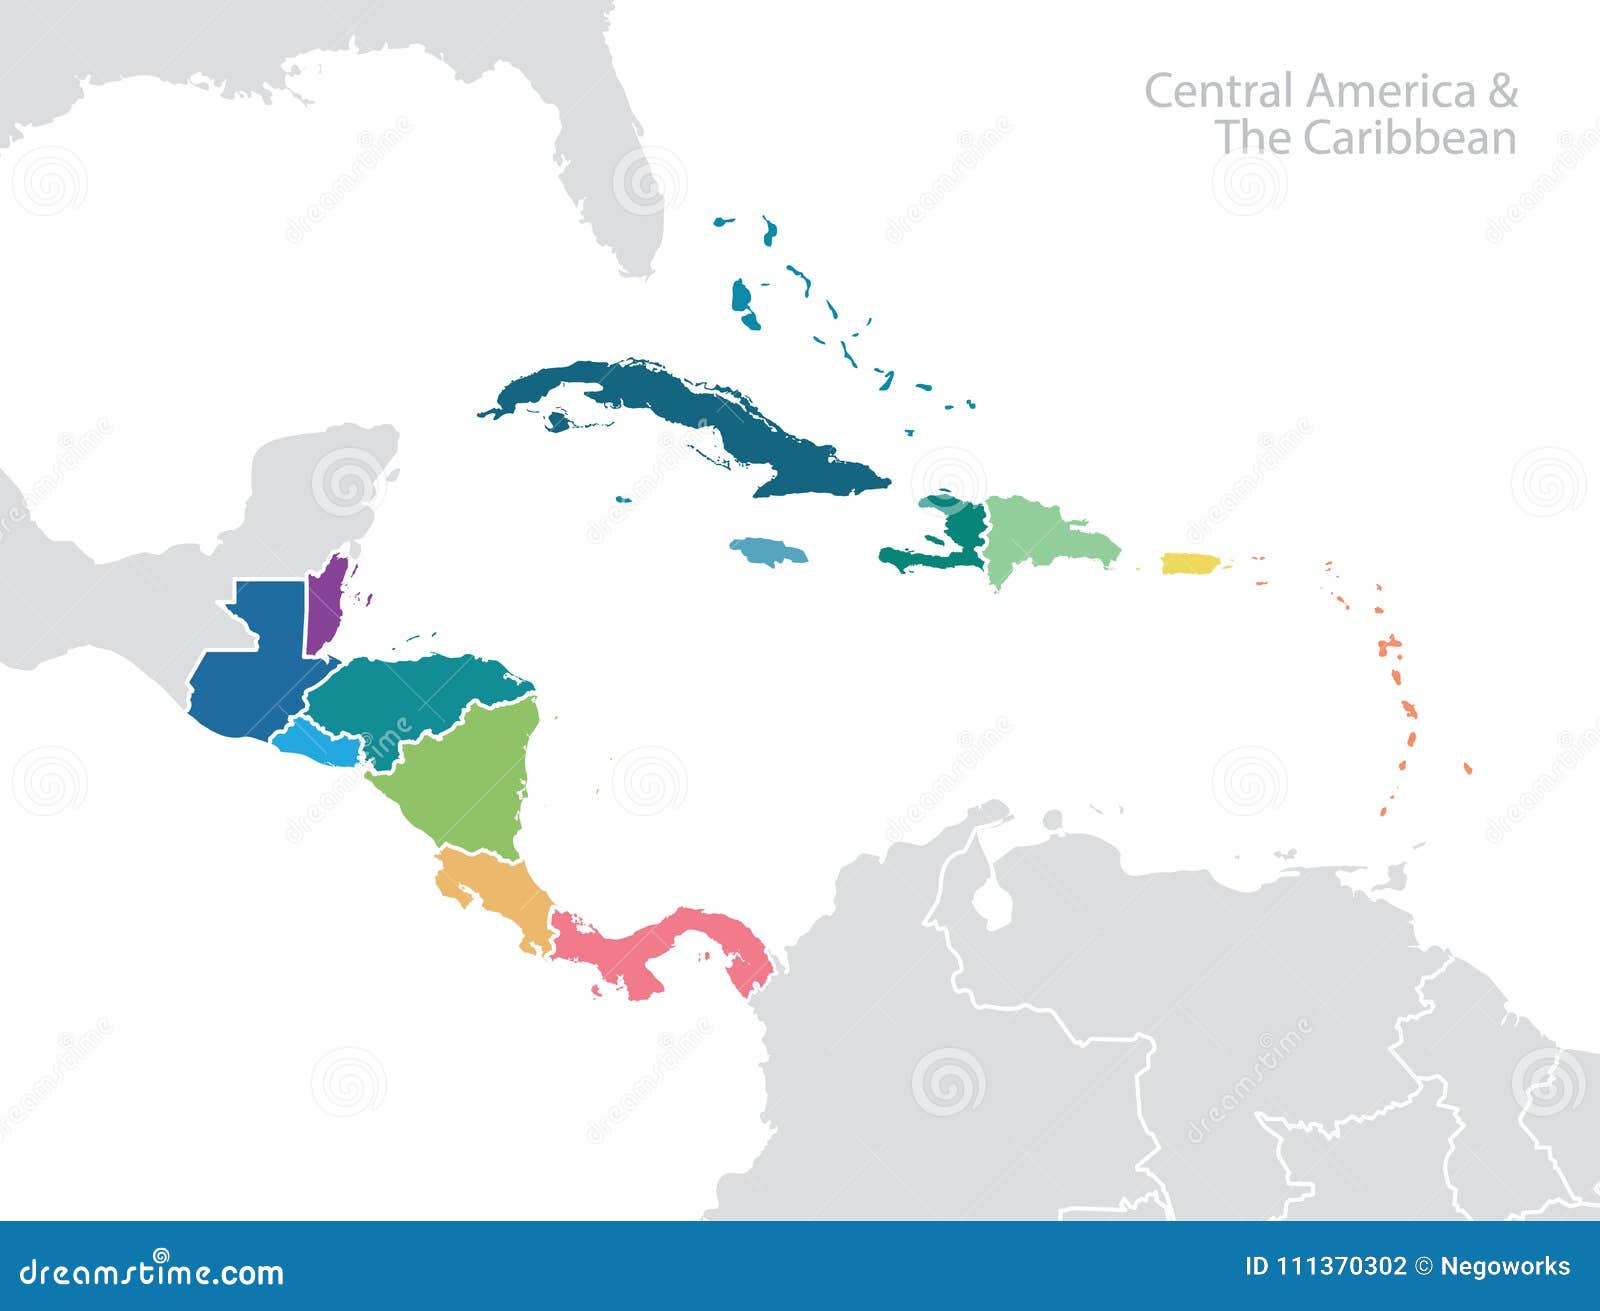 central america and the caribbean map